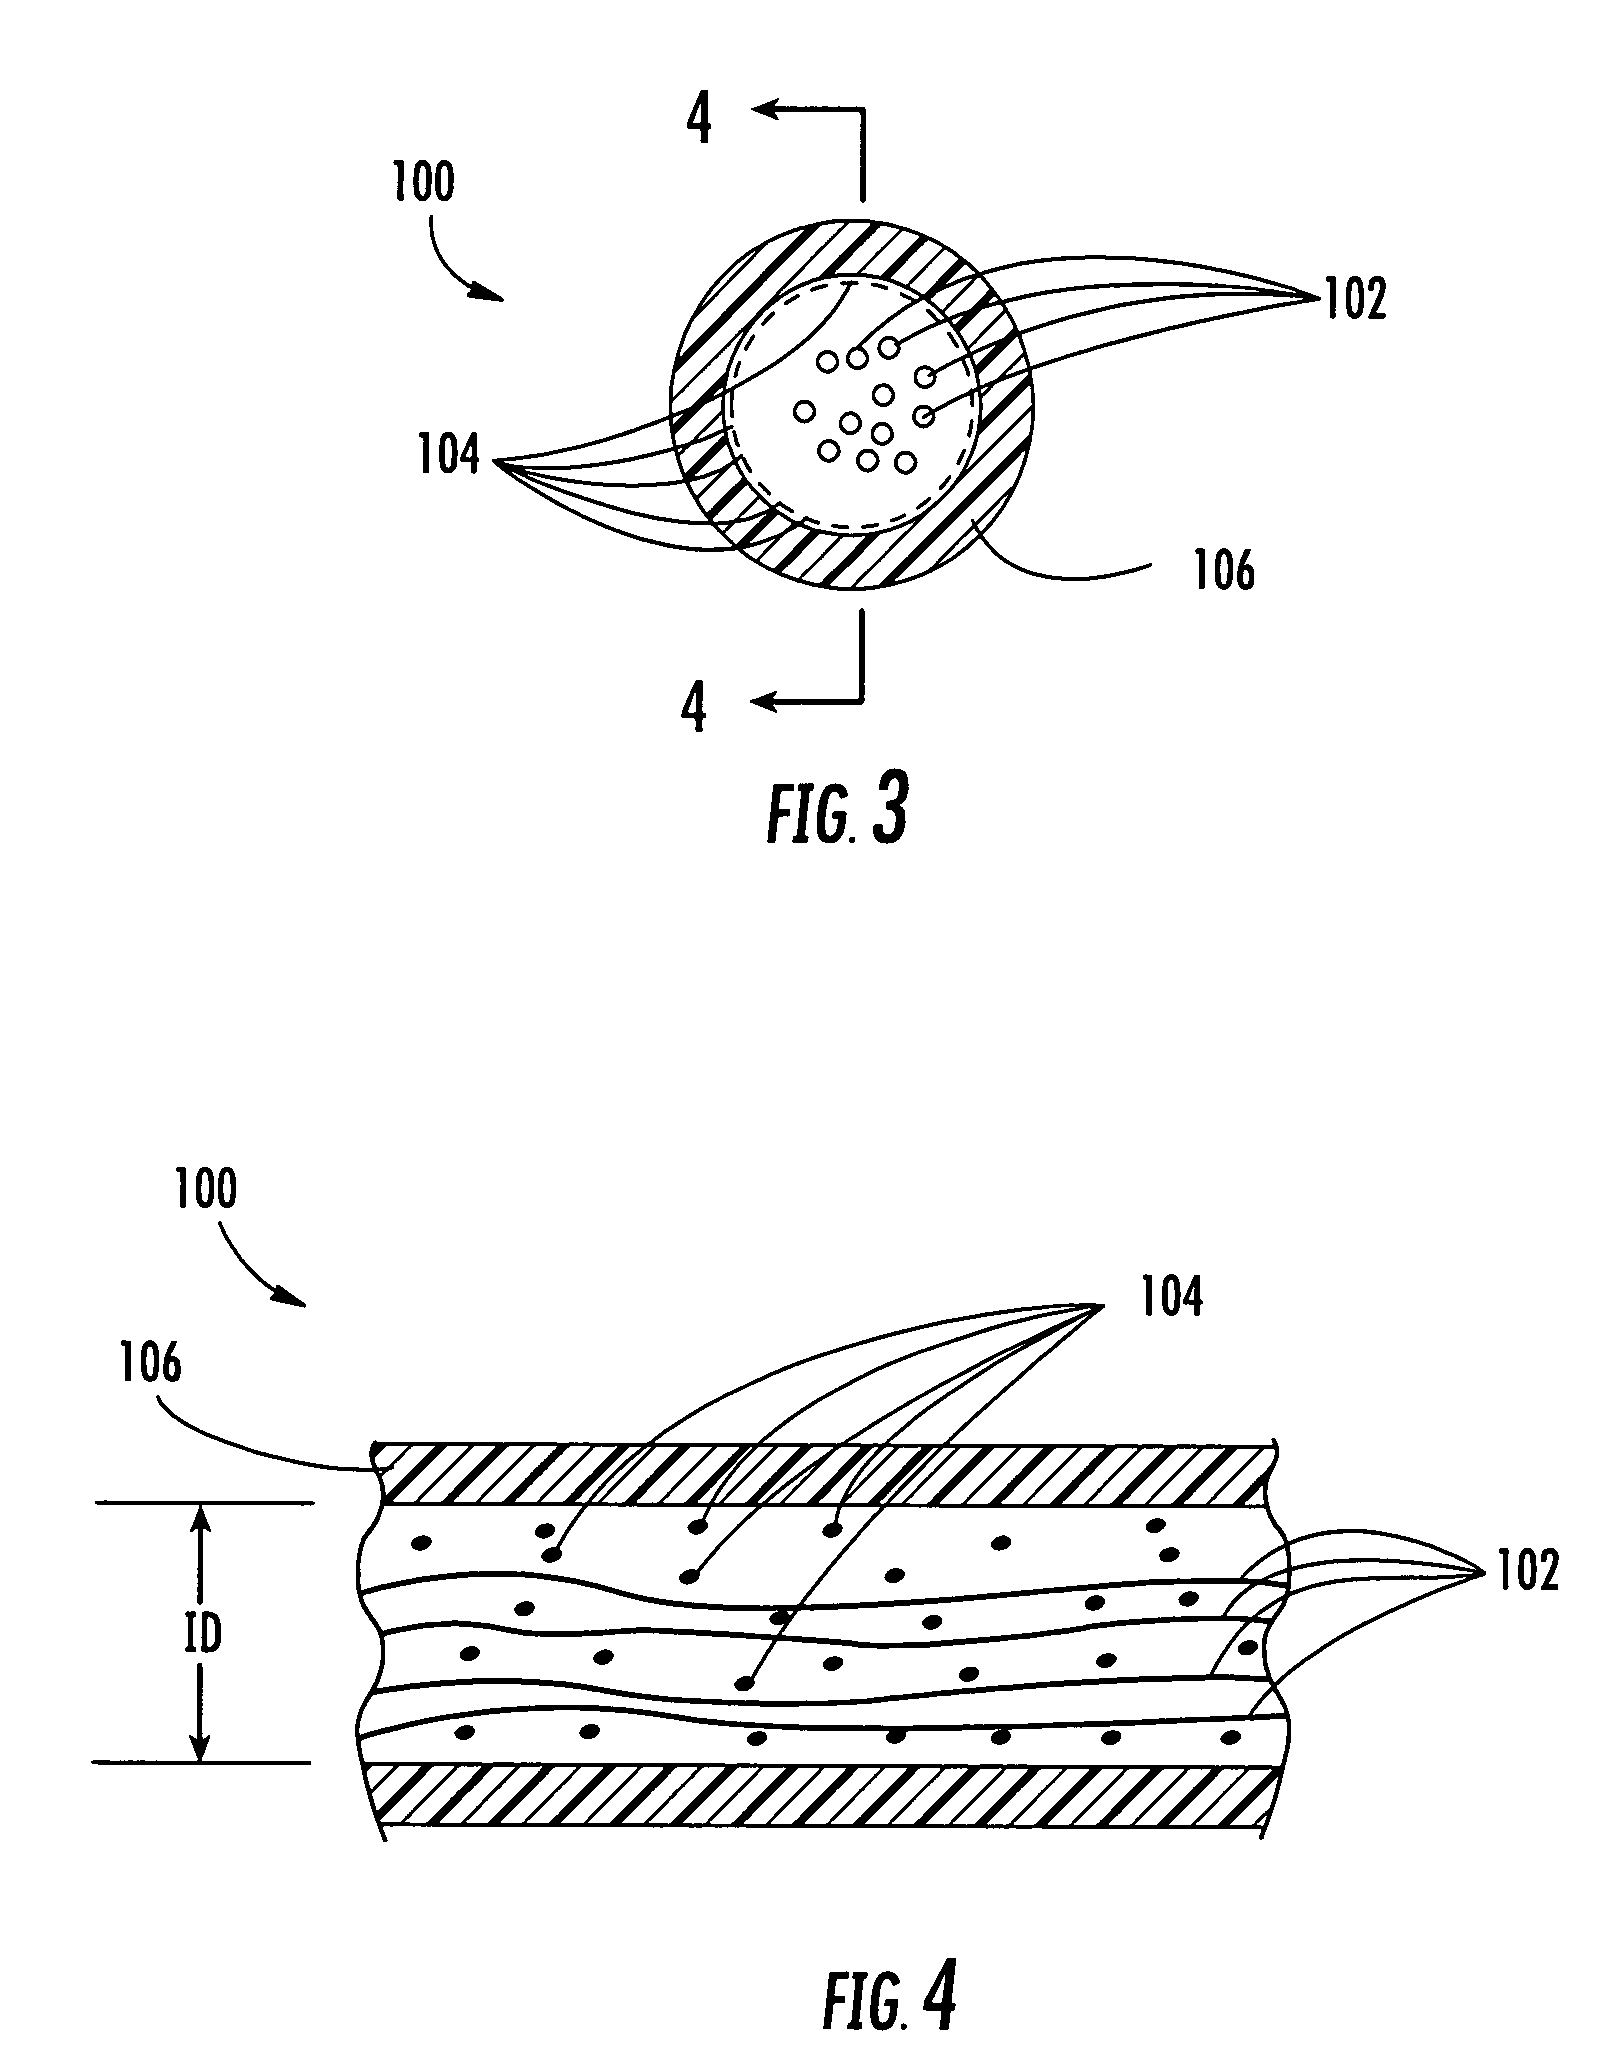 Optical fiber assemblies having relatively low-levels of water-swellable powder and methods therefor